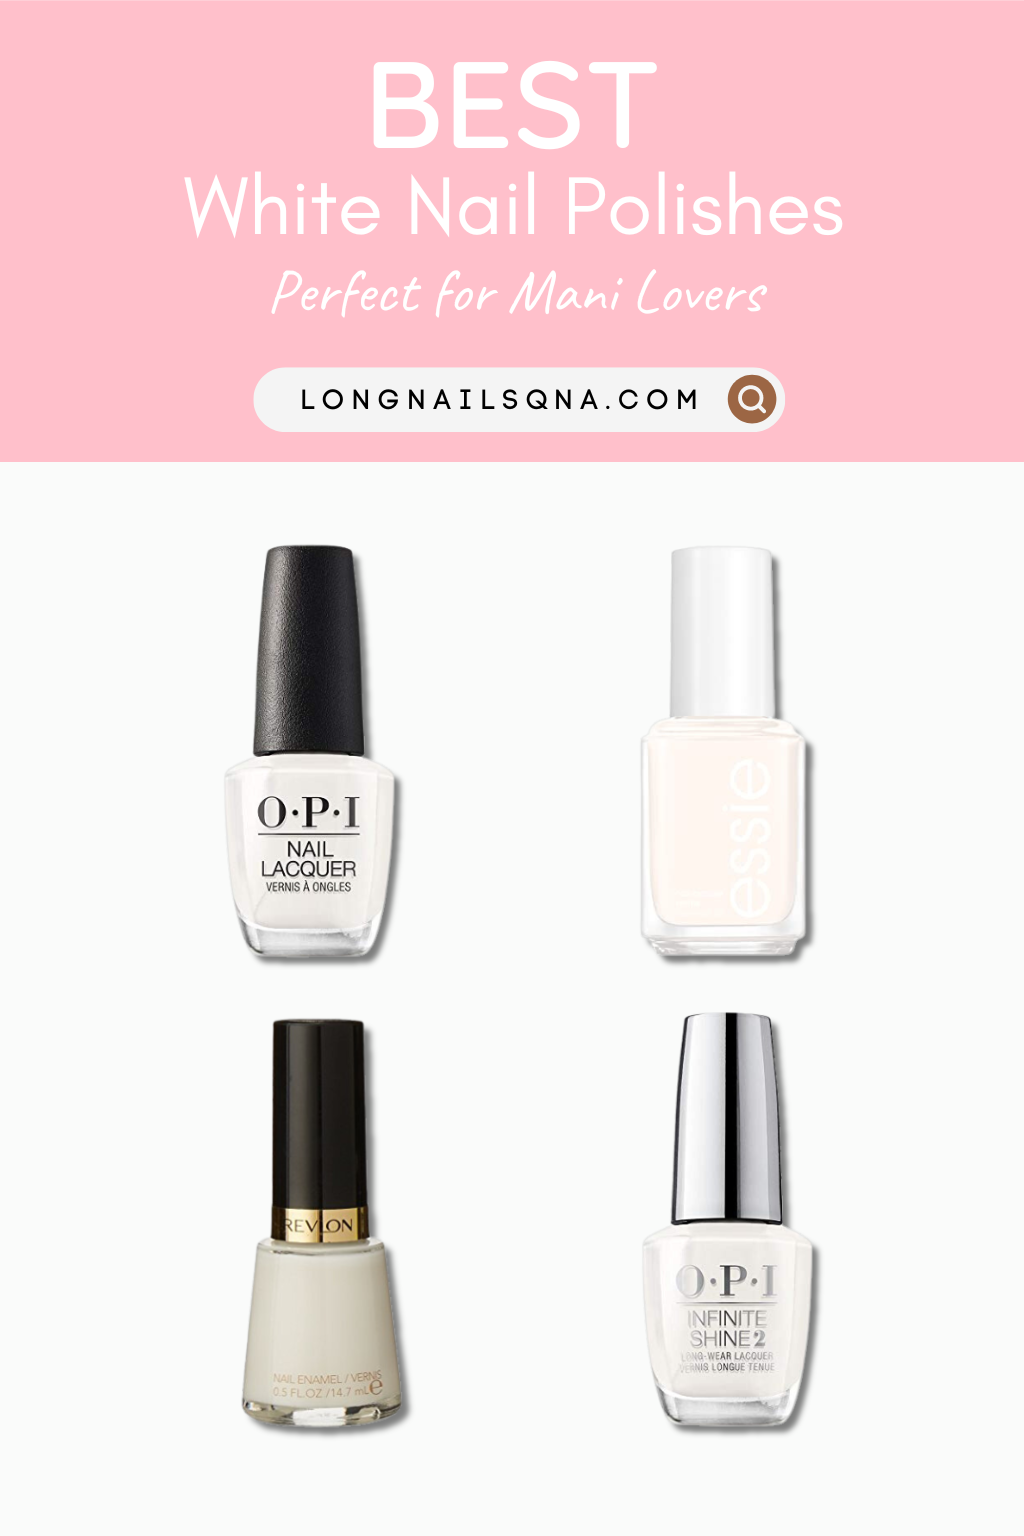 Best White Nail Polishes - Perfect for Mani Lovers